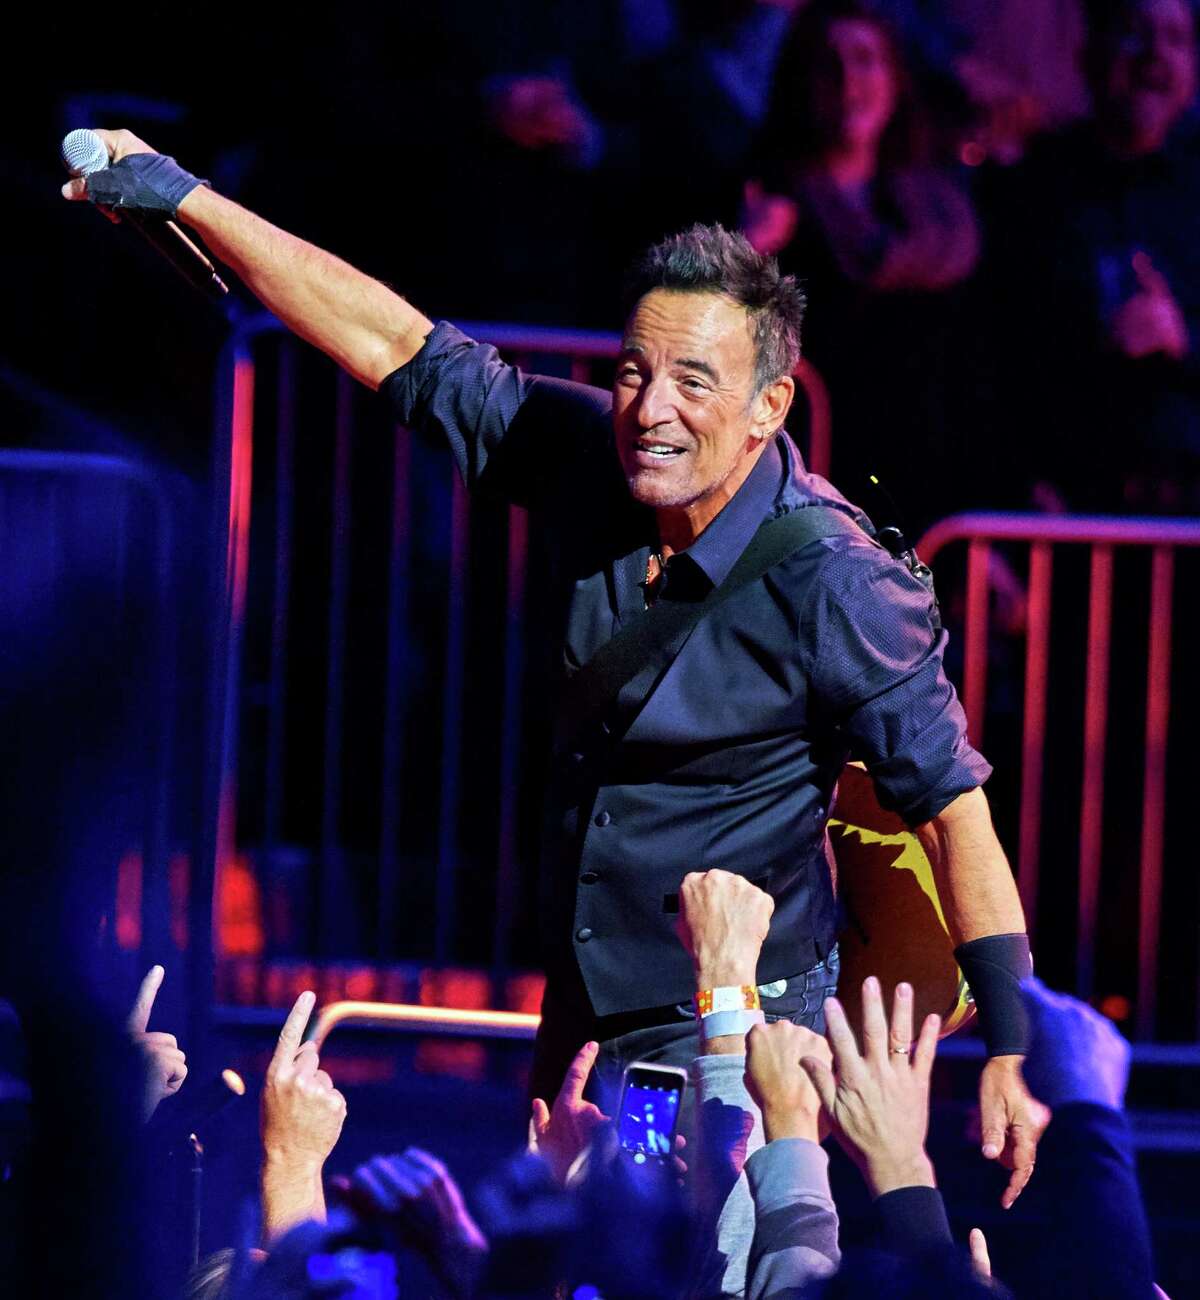 Bruce Springsteen performs with the E Street Band at Madison Square Garden, Wednesday, Jan. 27, 2016, in New York. (Photo by Robert Altman /Invision/AP) ORG XMIT: NYRA109